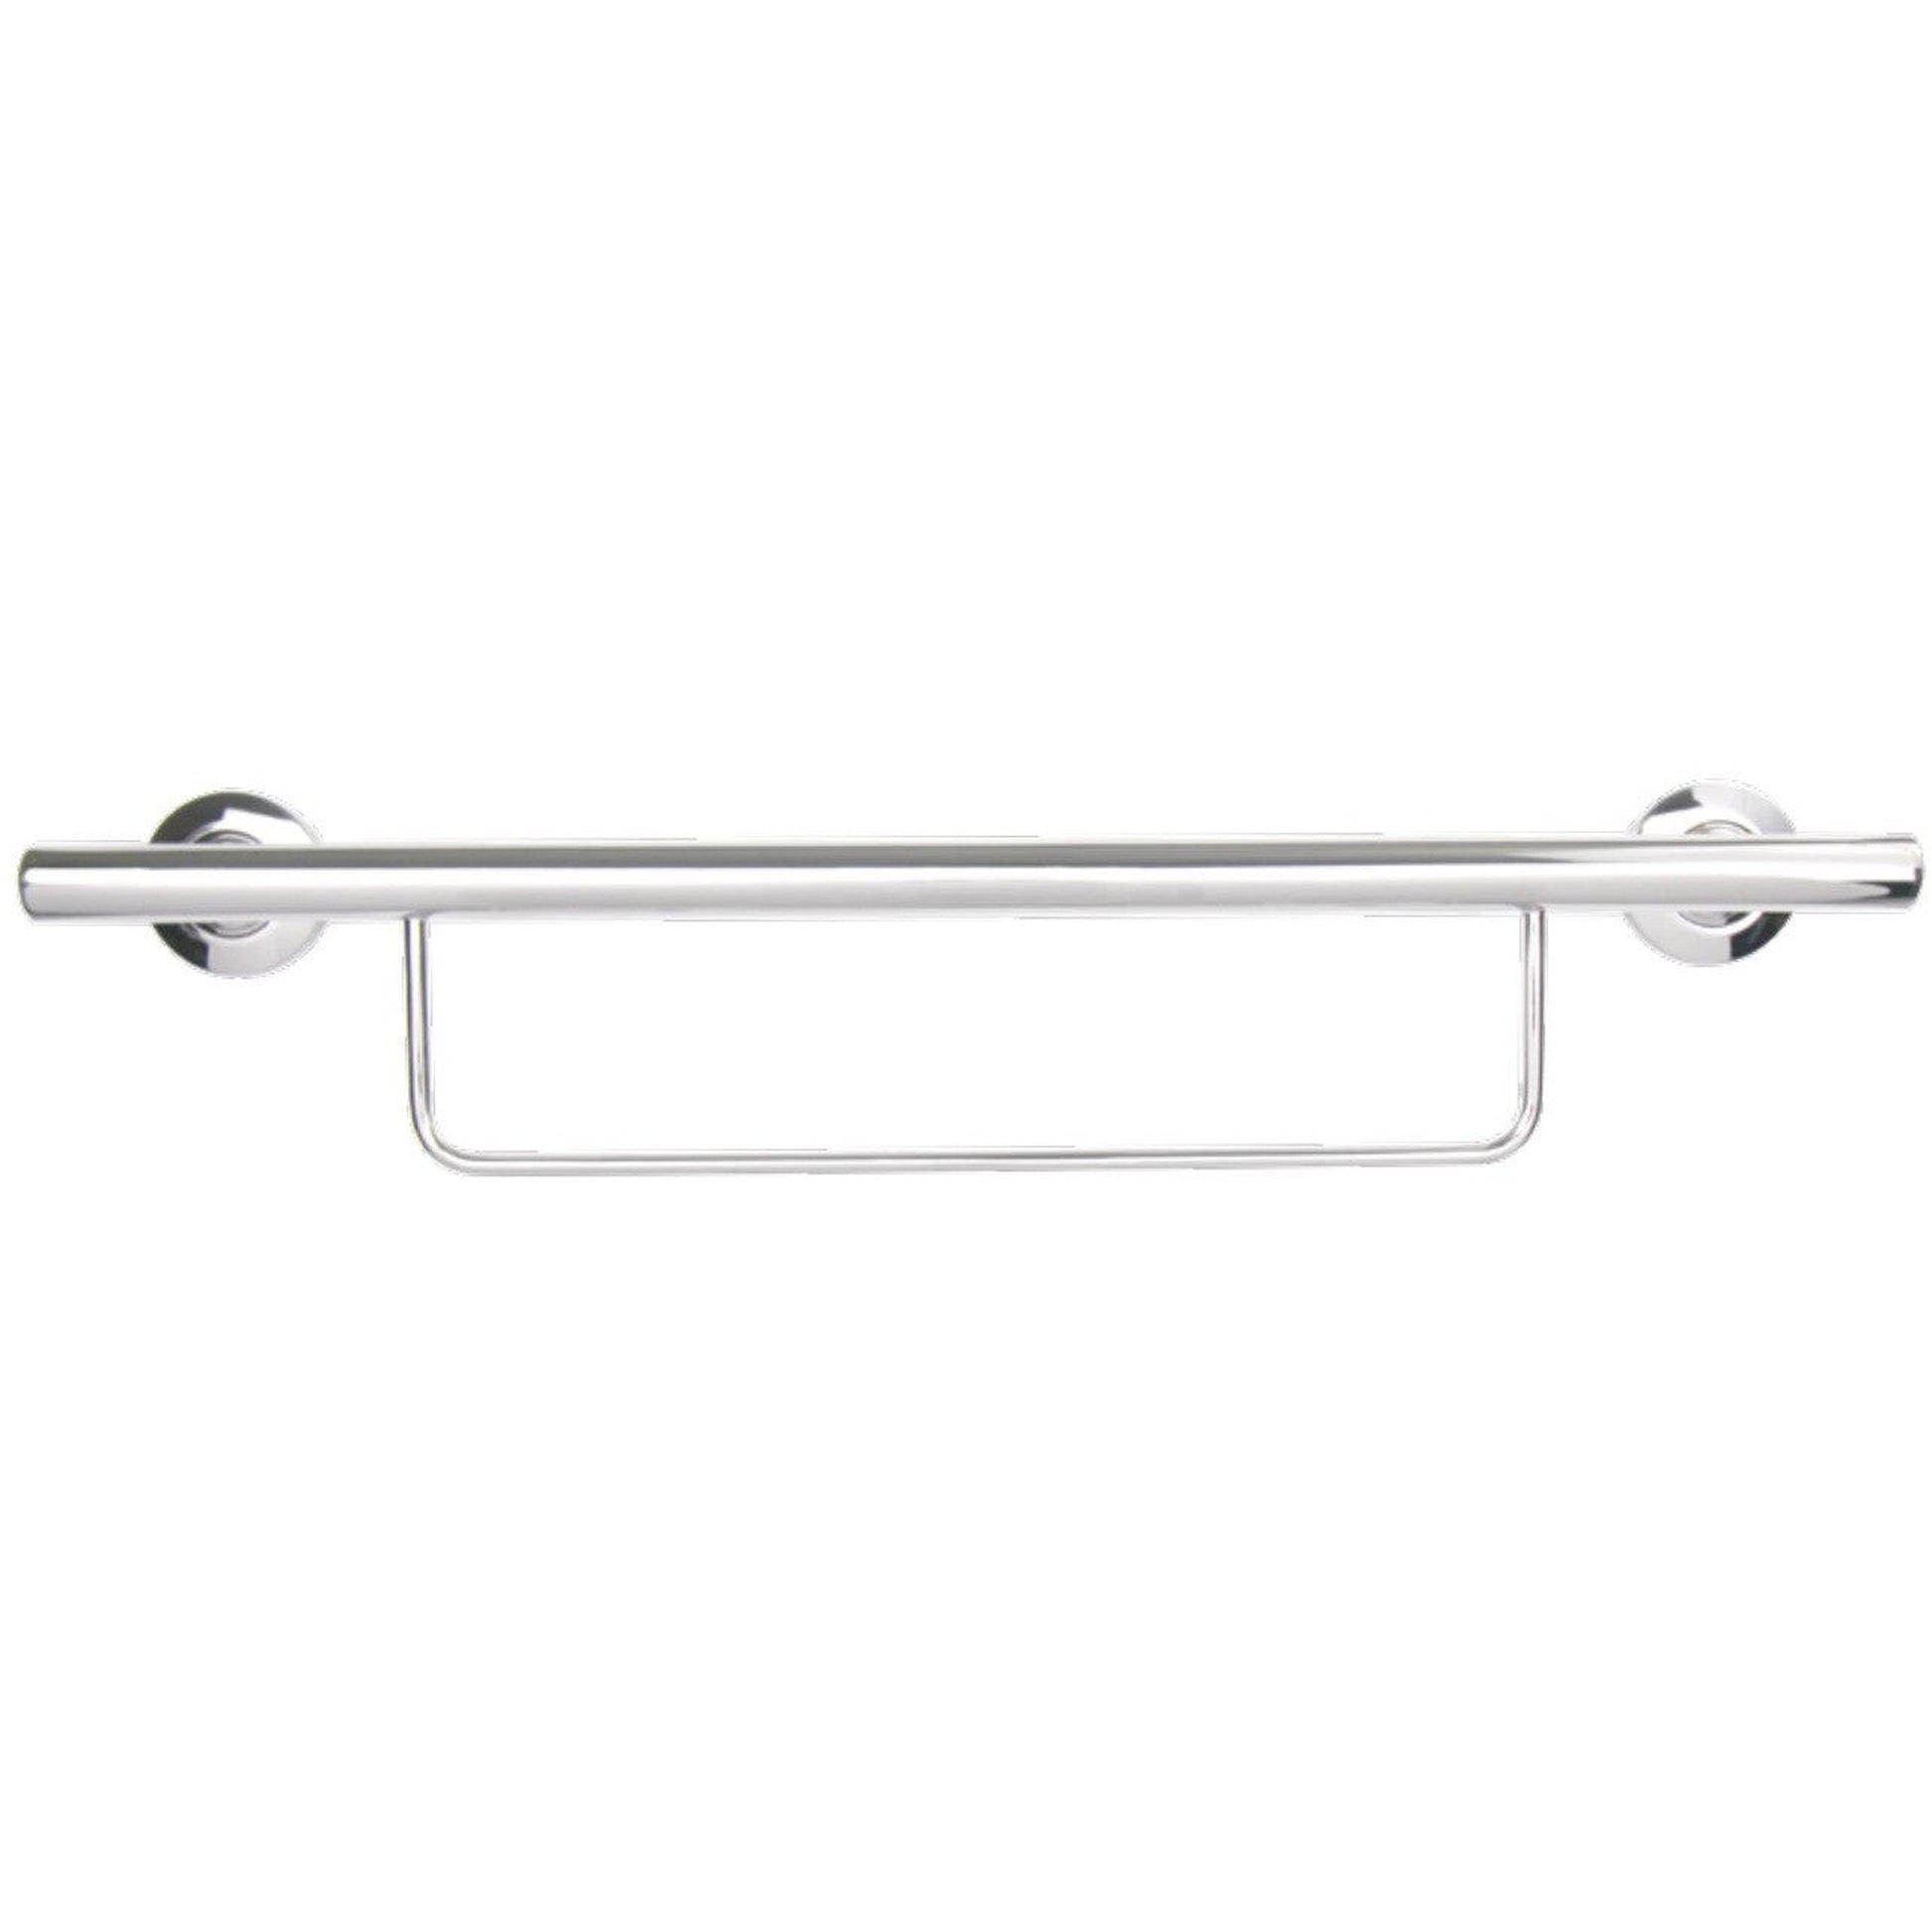 Seachrome Lifestyle & Wellness Series 30" Polished Stainless Steel 1.25 Diameter Concealed Flange Newport Grab Bar With Towel Bar